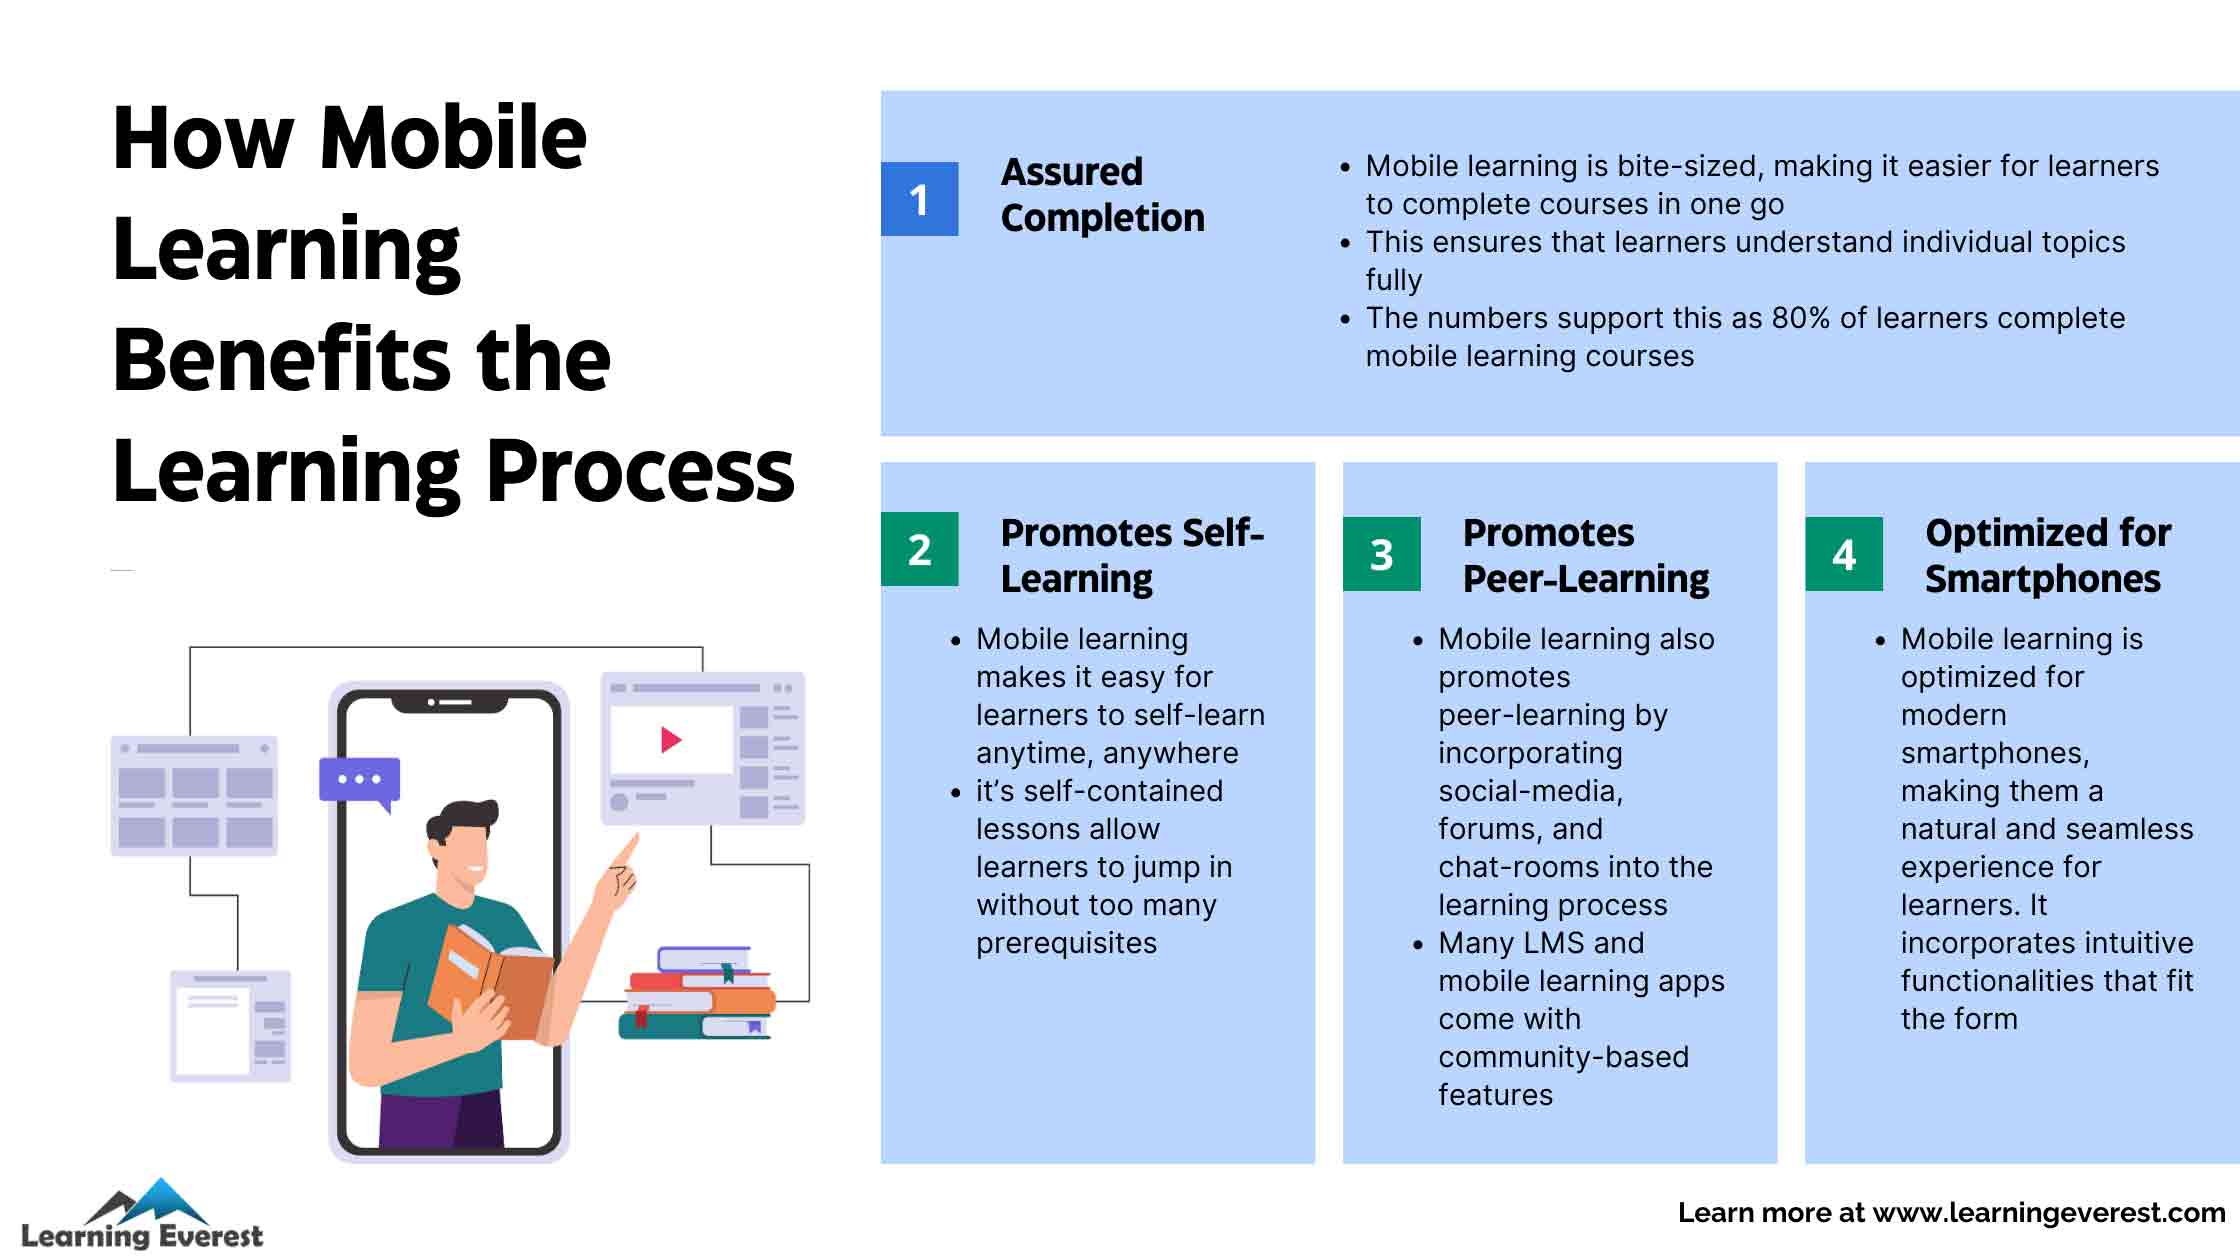 Mobile Learning for Innovation - How Mobile Learning Benefits the Learning Process